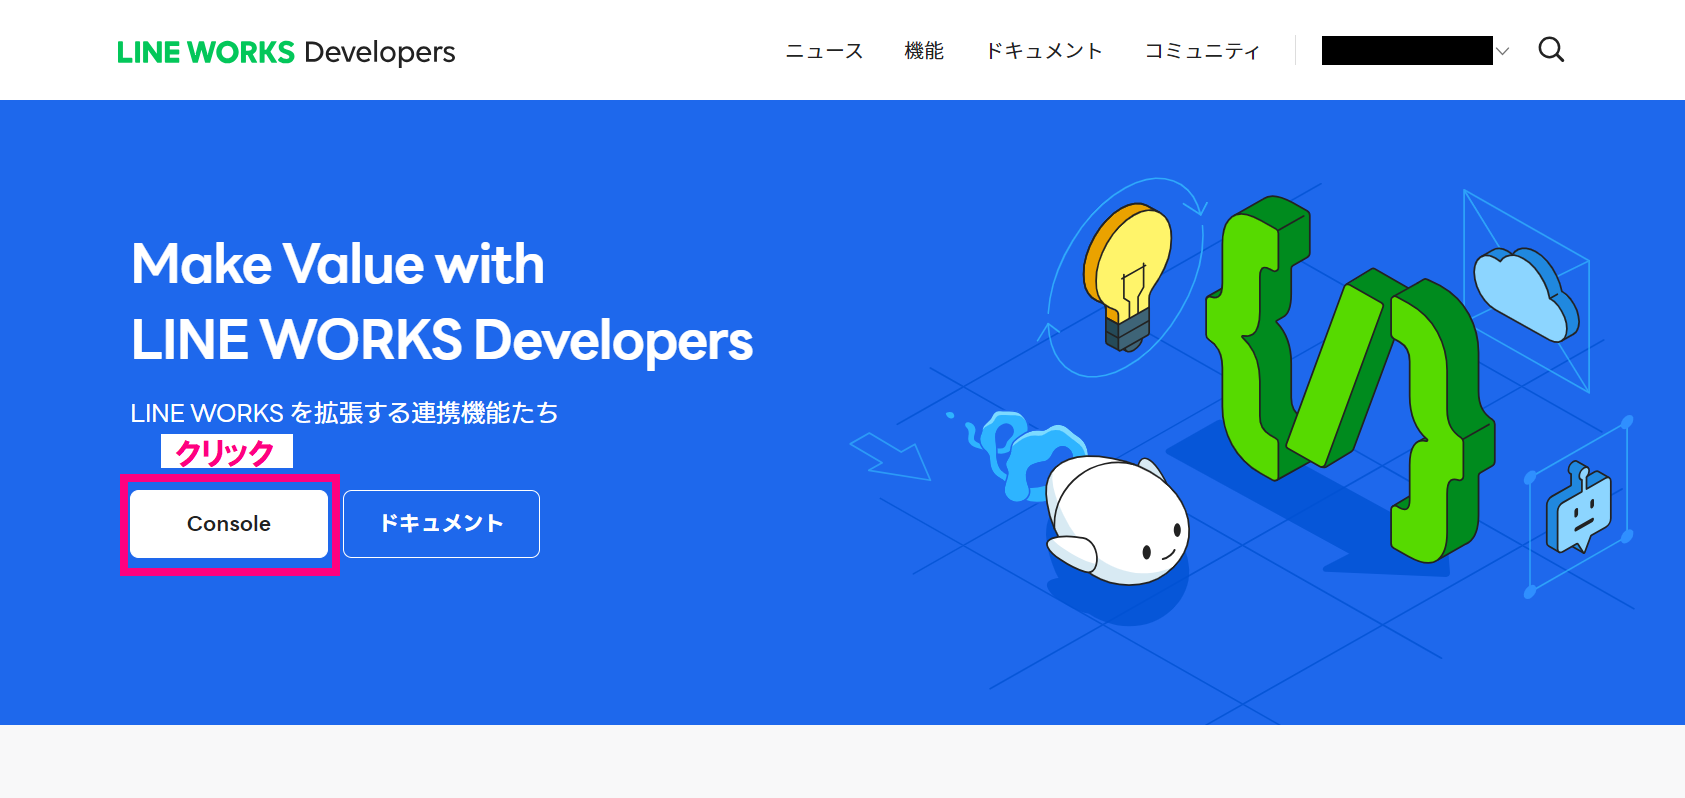 step10_LINE WORKS Developers Consoleクリック.png